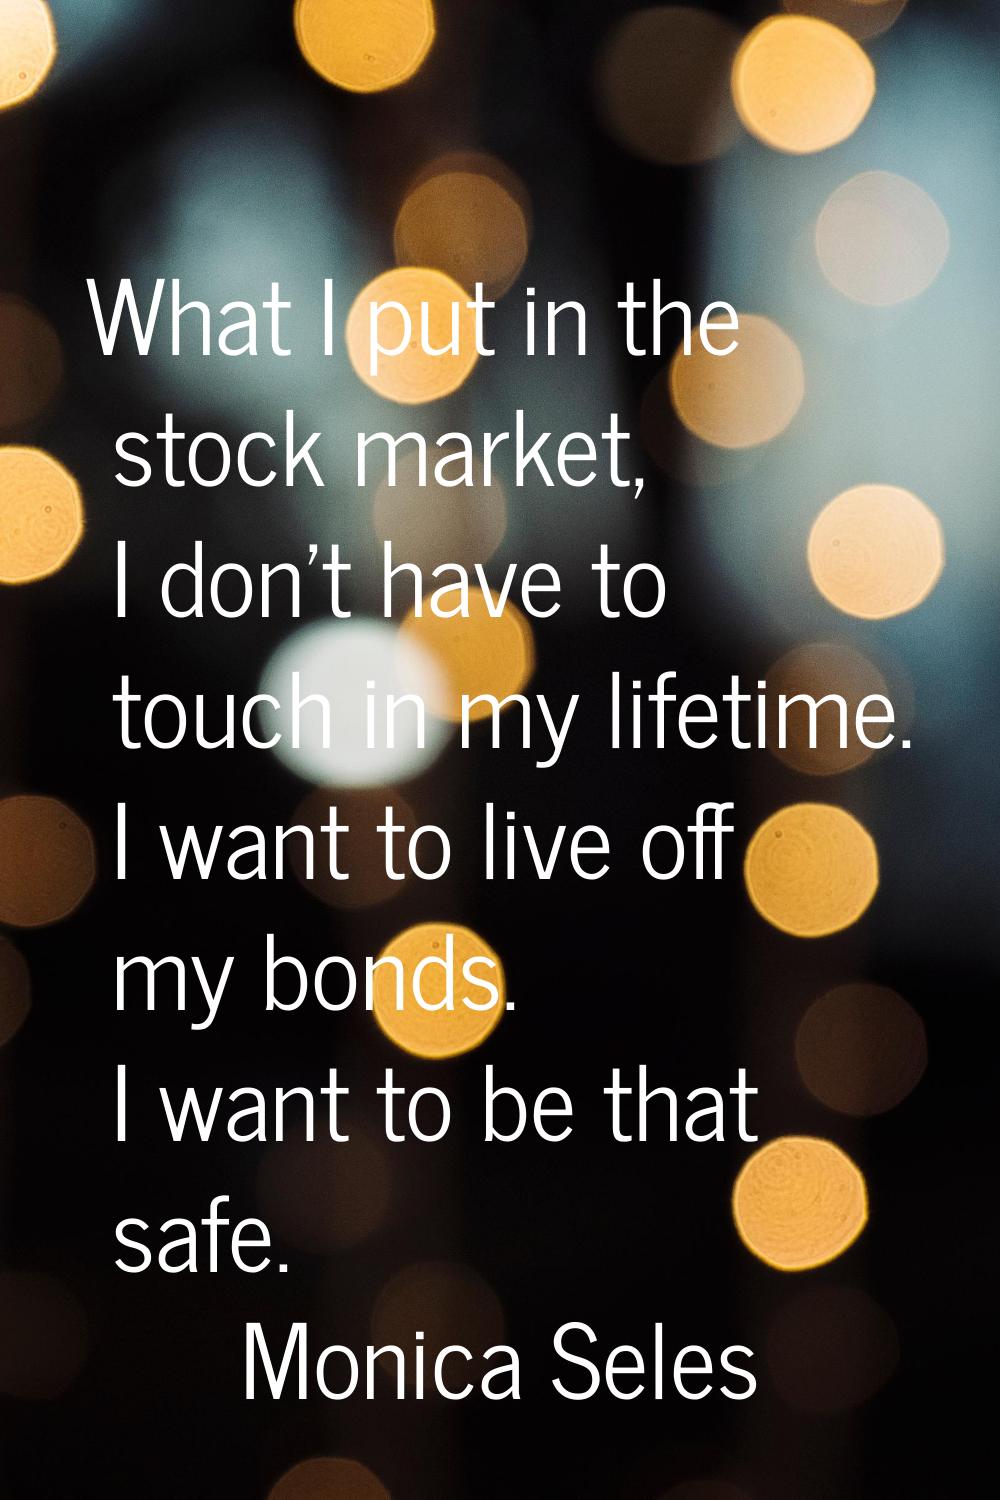 What I put in the stock market, I don't have to touch in my lifetime. I want to live off my bonds. 